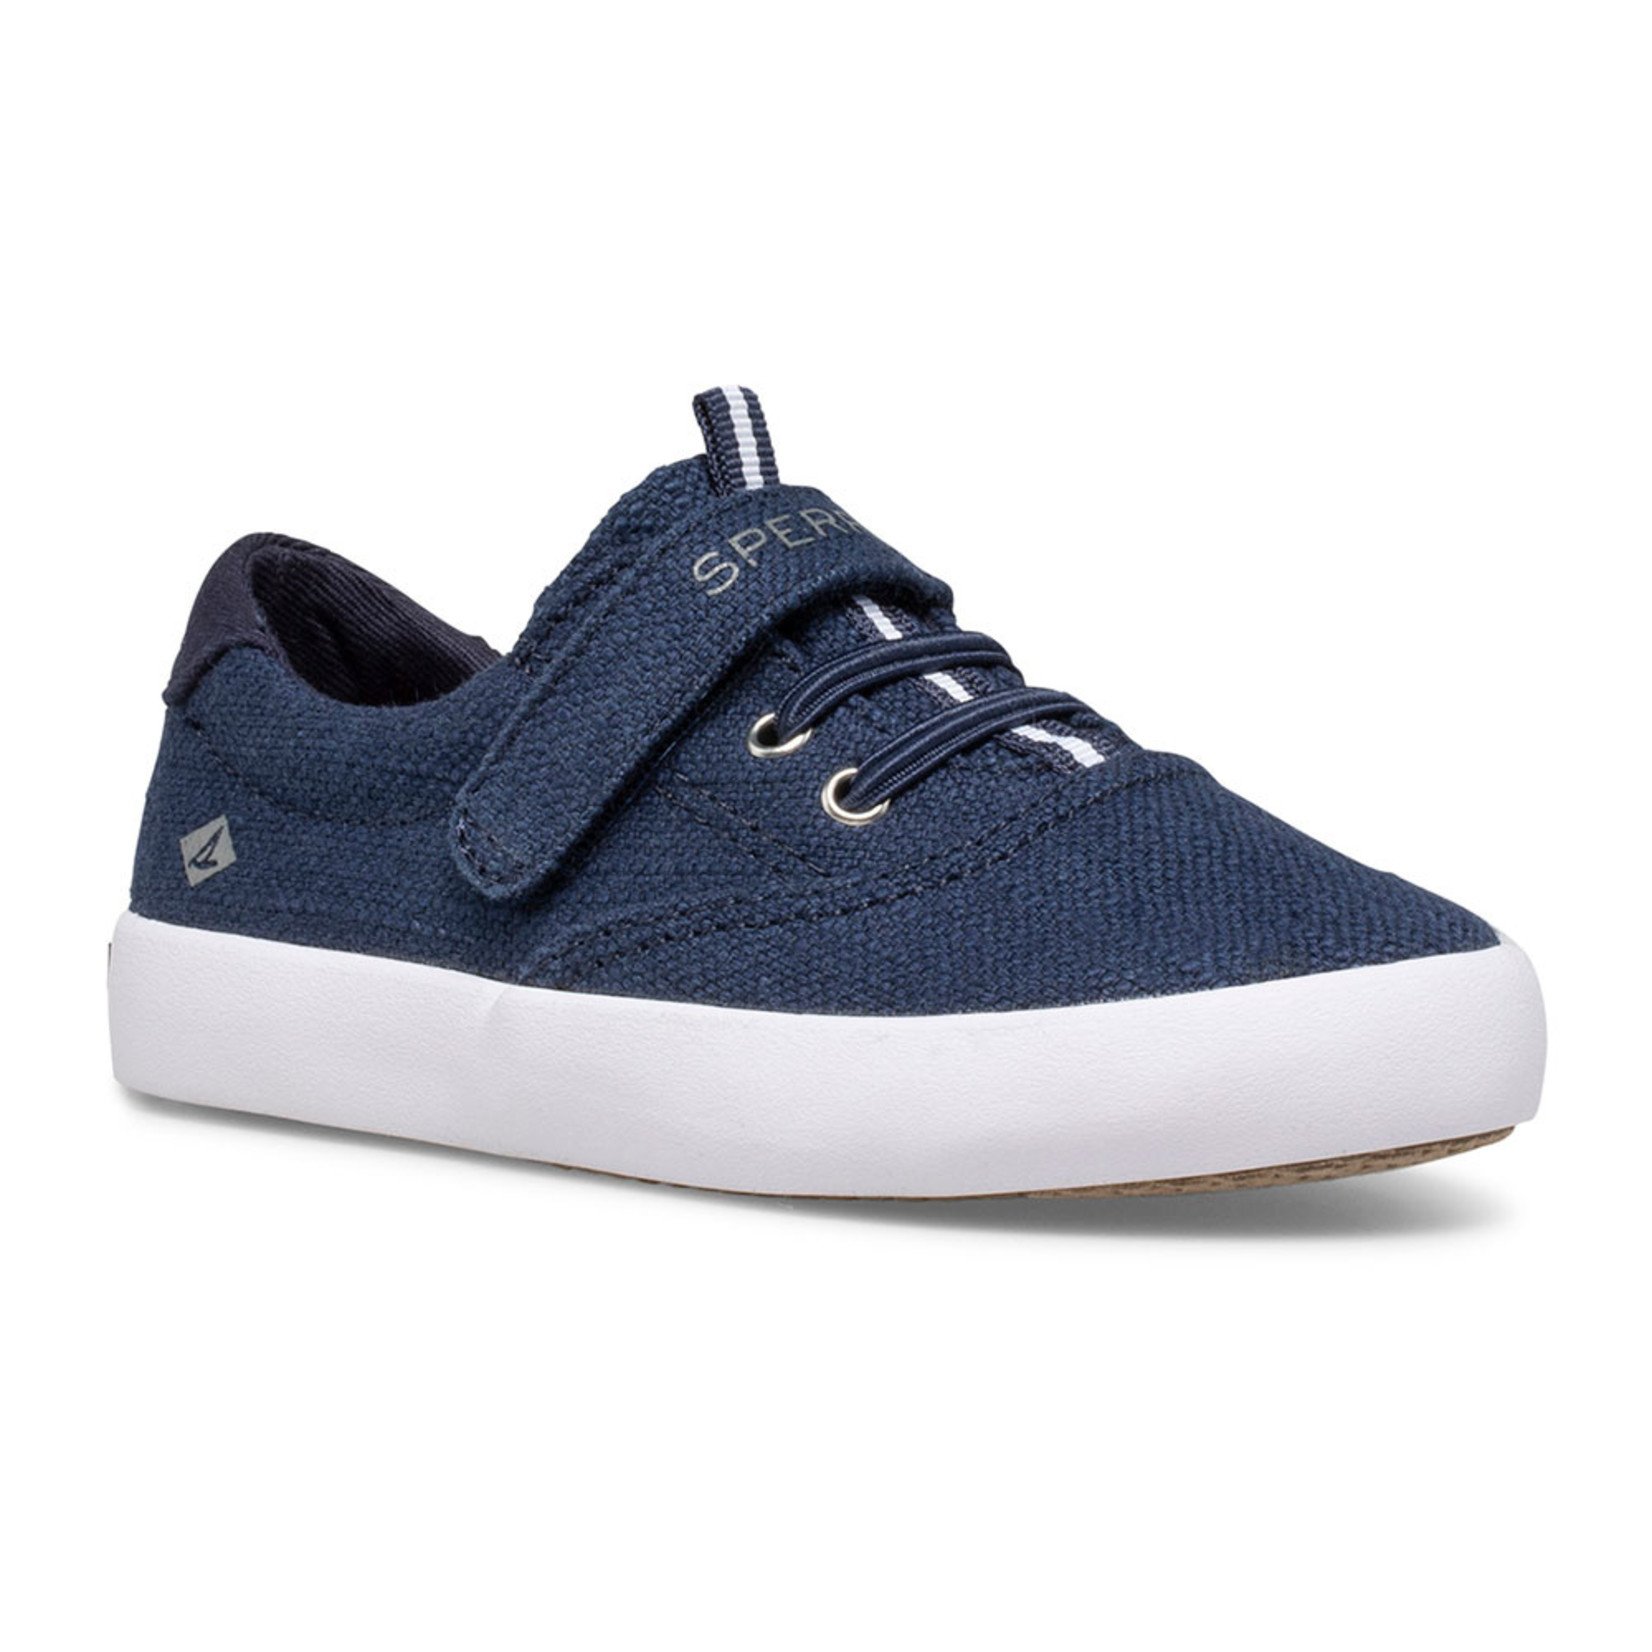 Sperry Sperry Spinnaker Washable Jr.